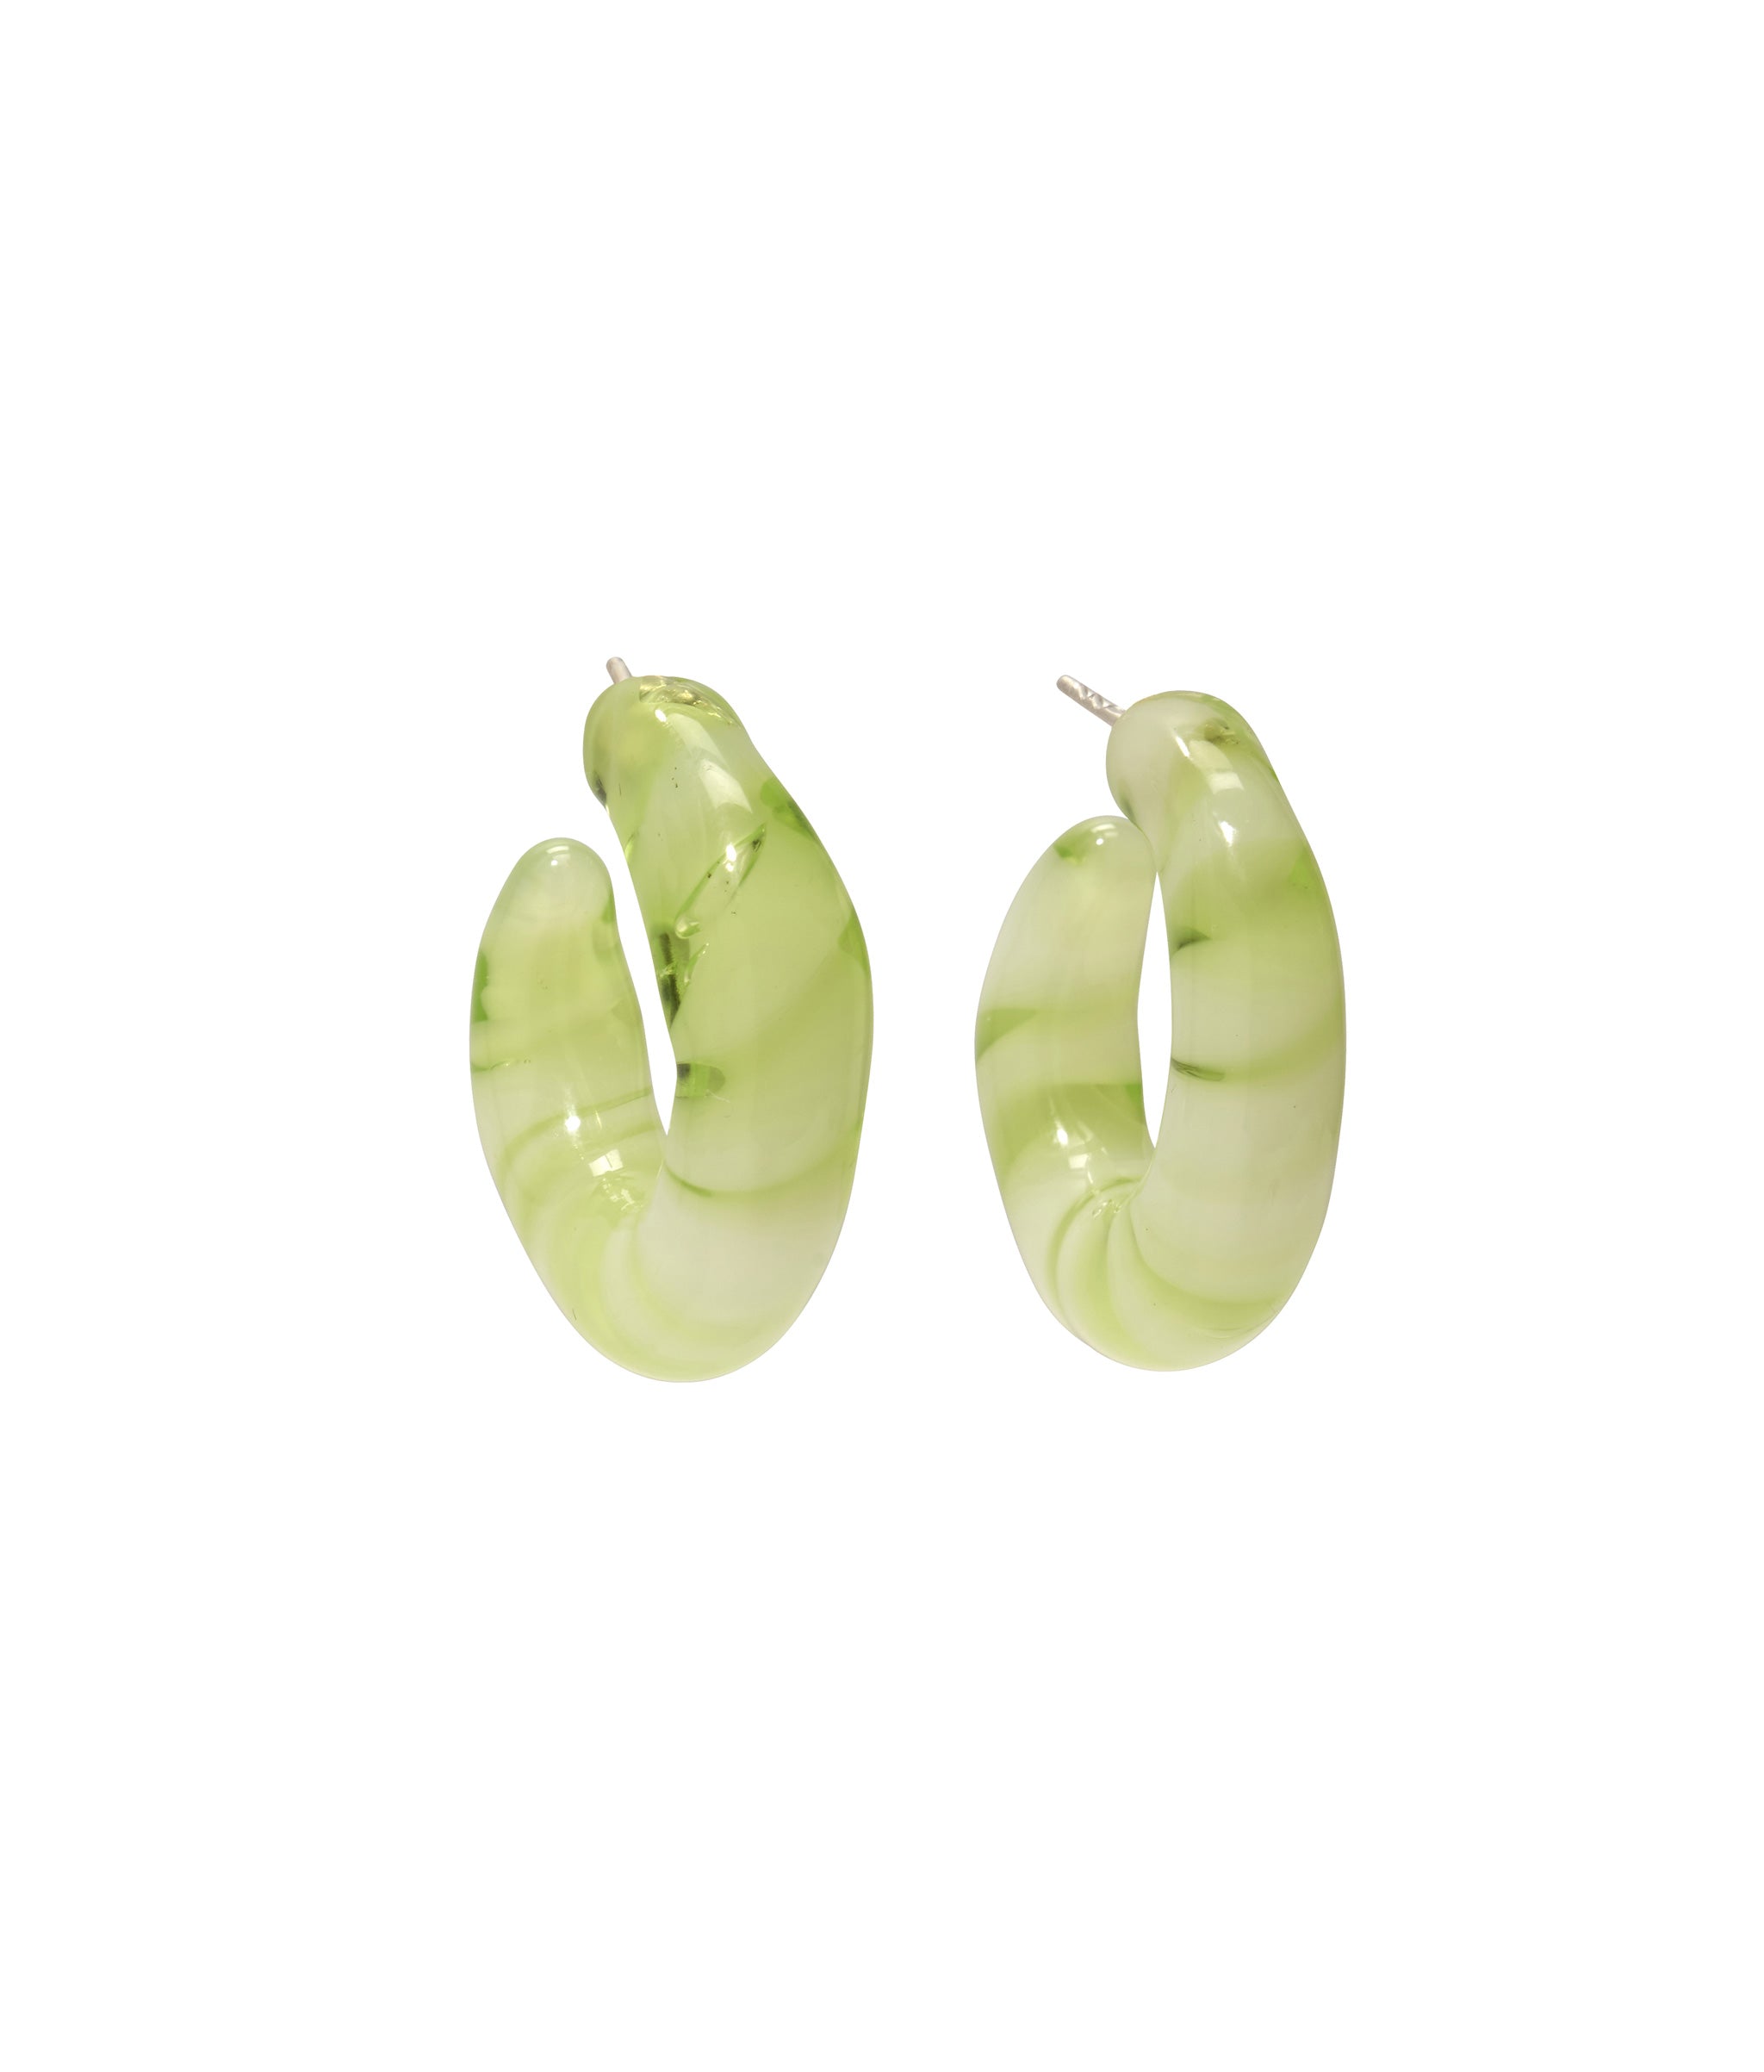 Cascais Hoops in Lime. Green-hued handmade glass swirl with sterling silver posts.